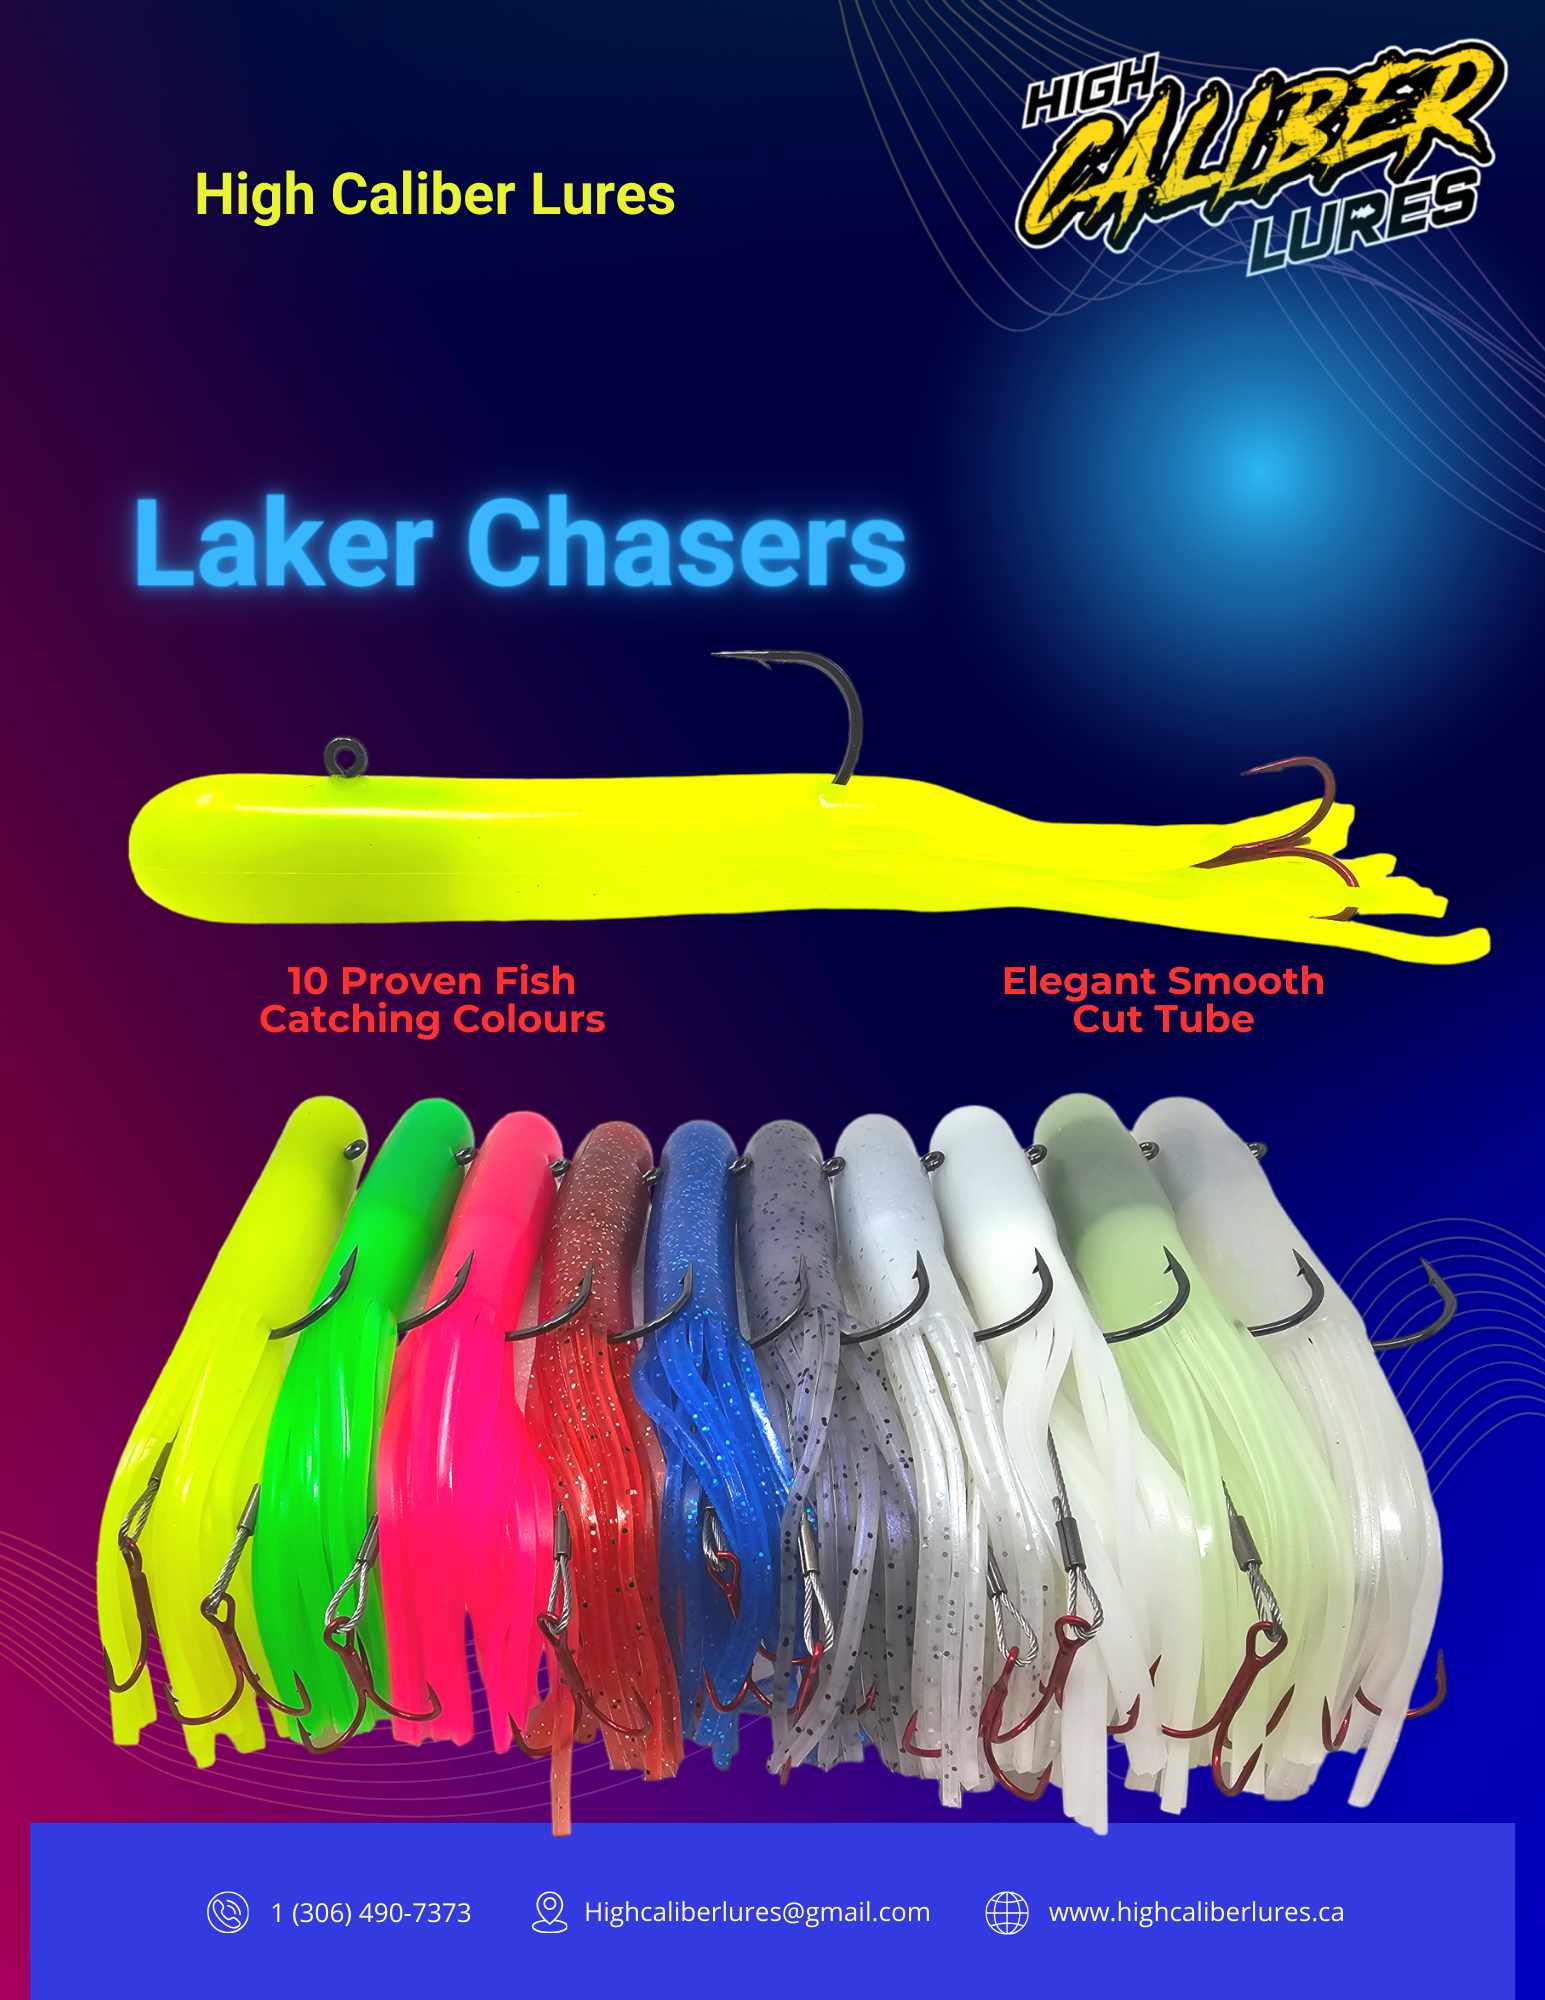 Fishing Lure Decal - Diamond T Outfitters